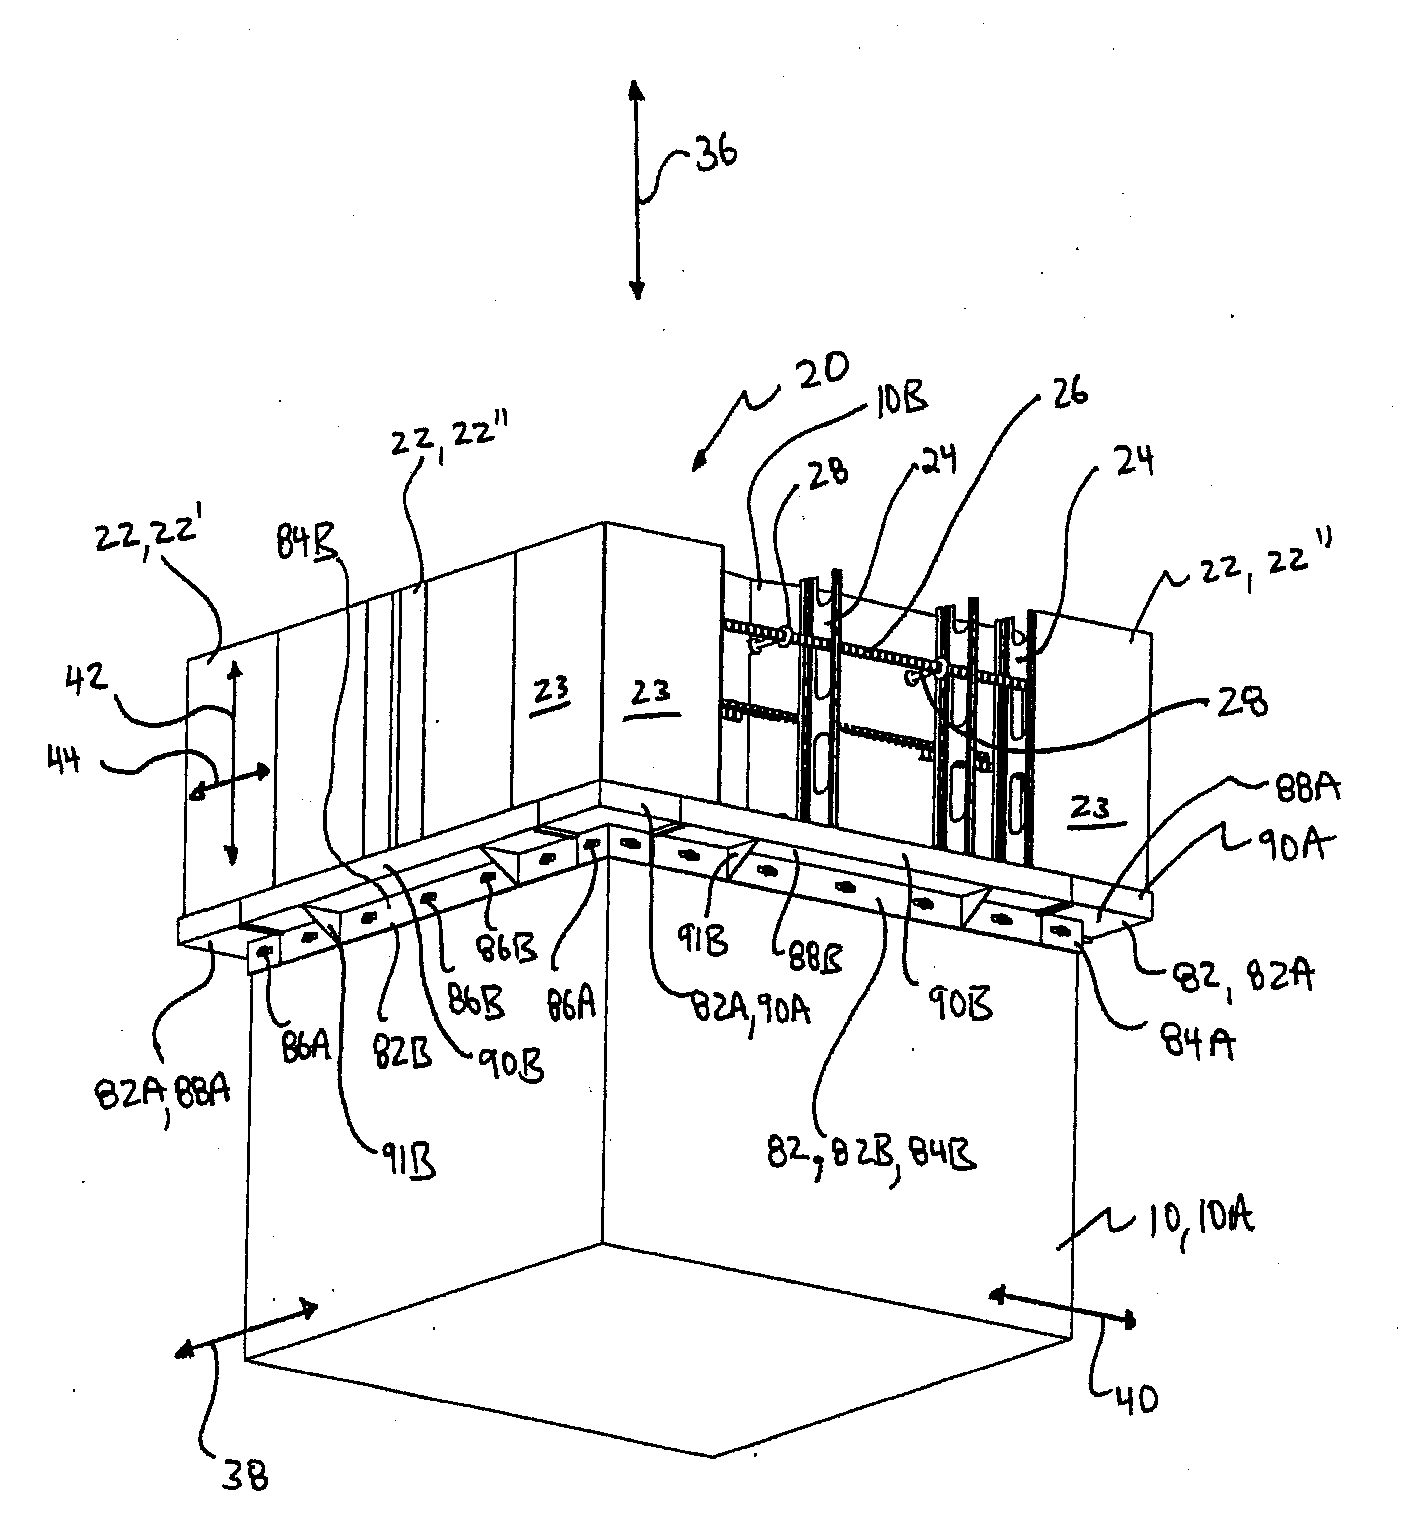 Methods and apparatus for restoring, repairing, reinforcing and/or protecting structures using concrete